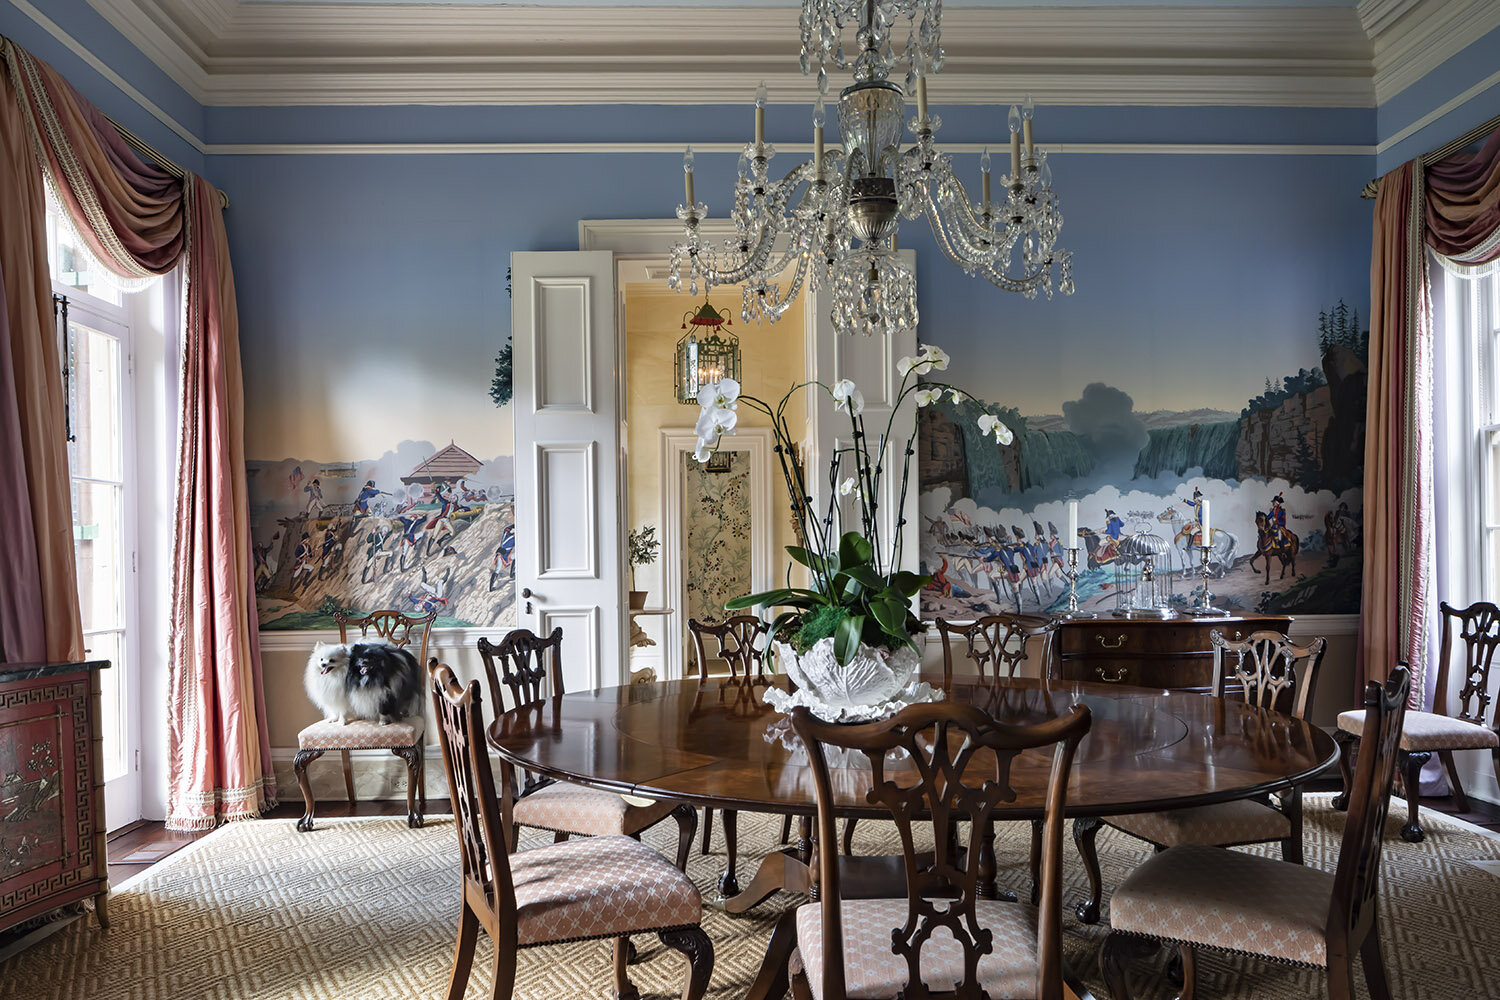 DINING ROOM MAKEOVER with A Review of Zuber Two Centuries of Panoramic  Wallpaper by Brian Coleman  YouTube